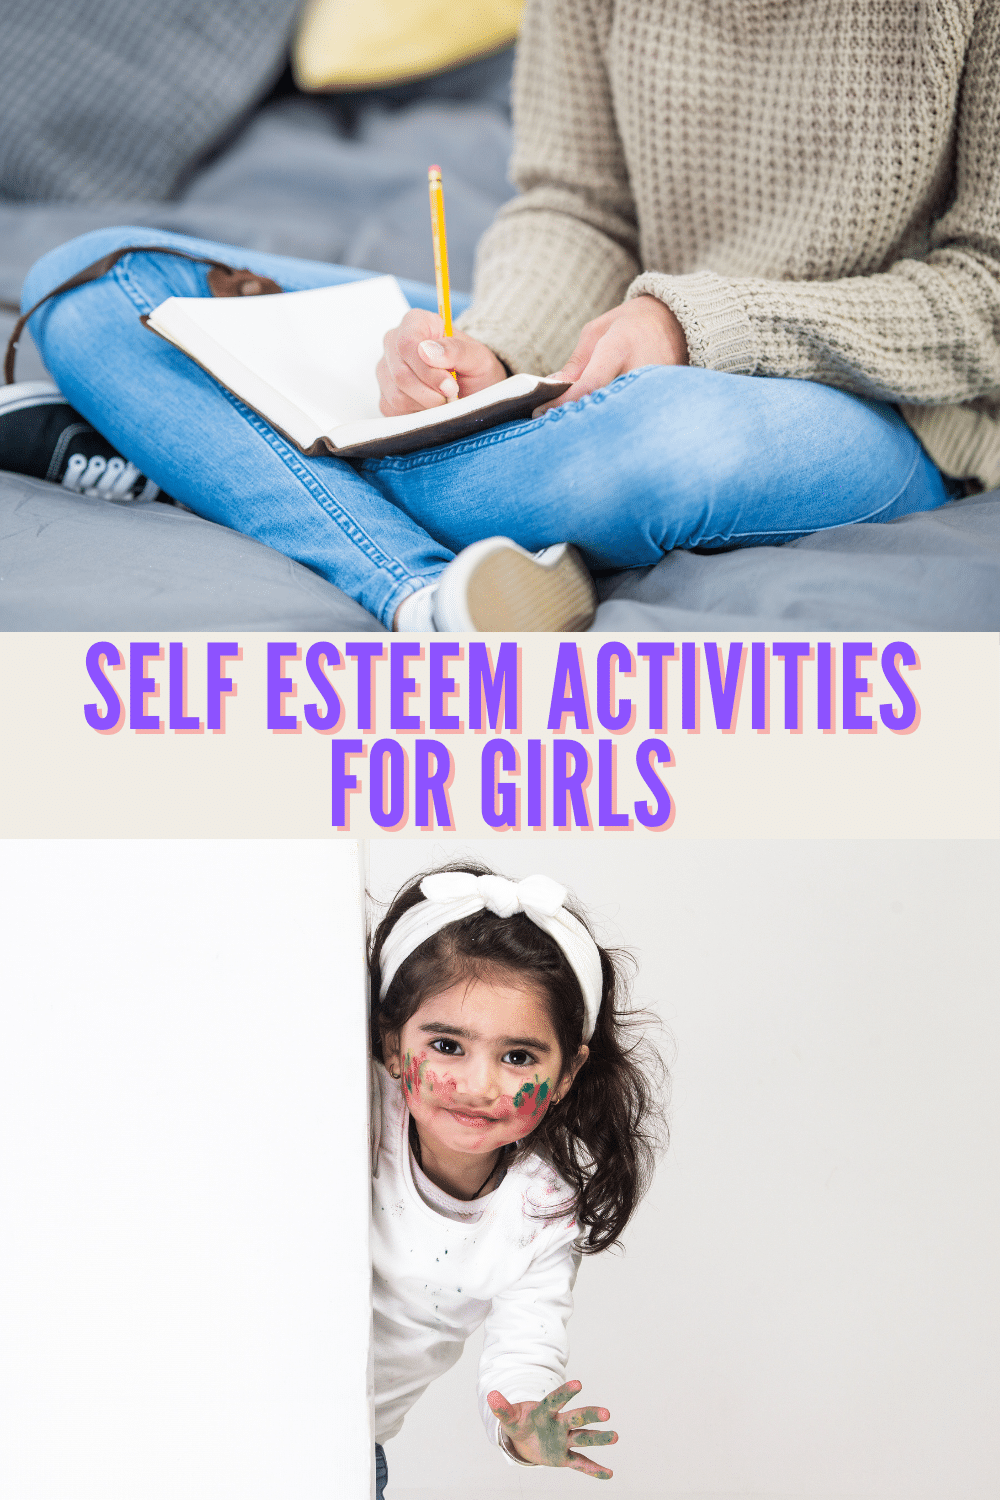 If you've got a daughter, you probably need these self esteem activities for girls that you can do with her to build her up! #selfesteem #girls #raisinggirls via @wondermomwannab